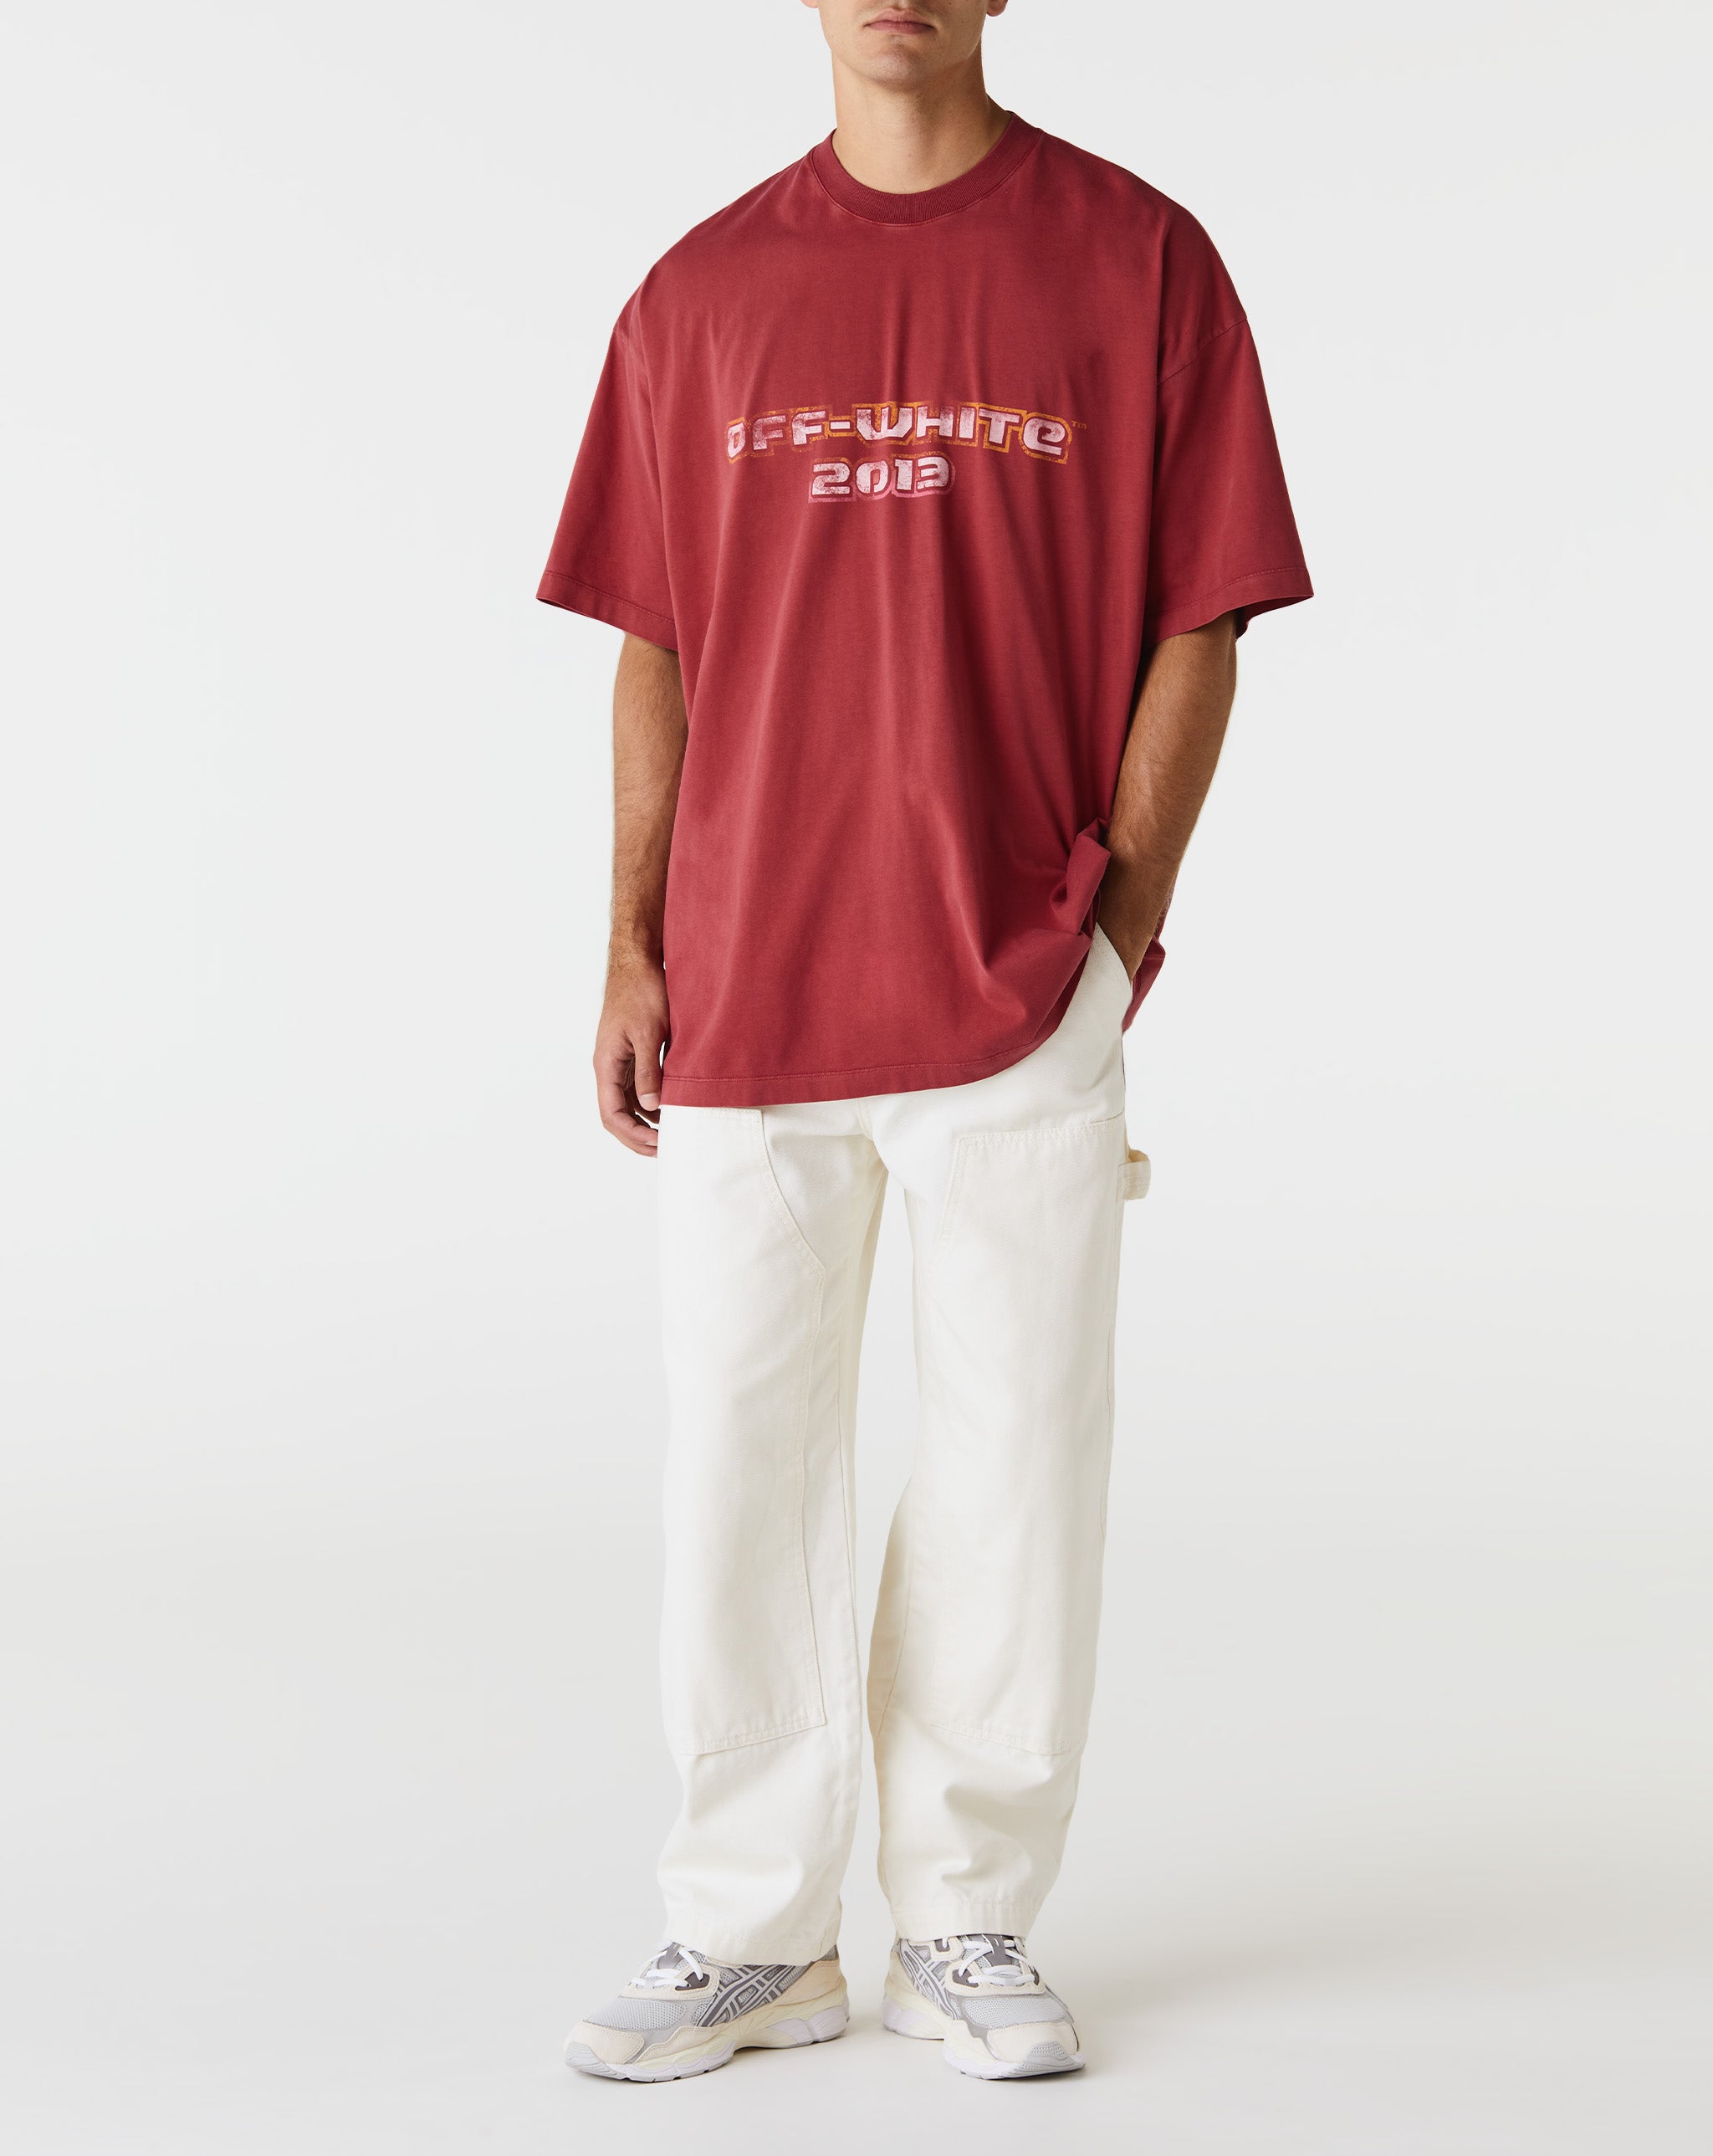 Off-White Digit Bacchus Over T-Shirt - Rule of Next Apparel